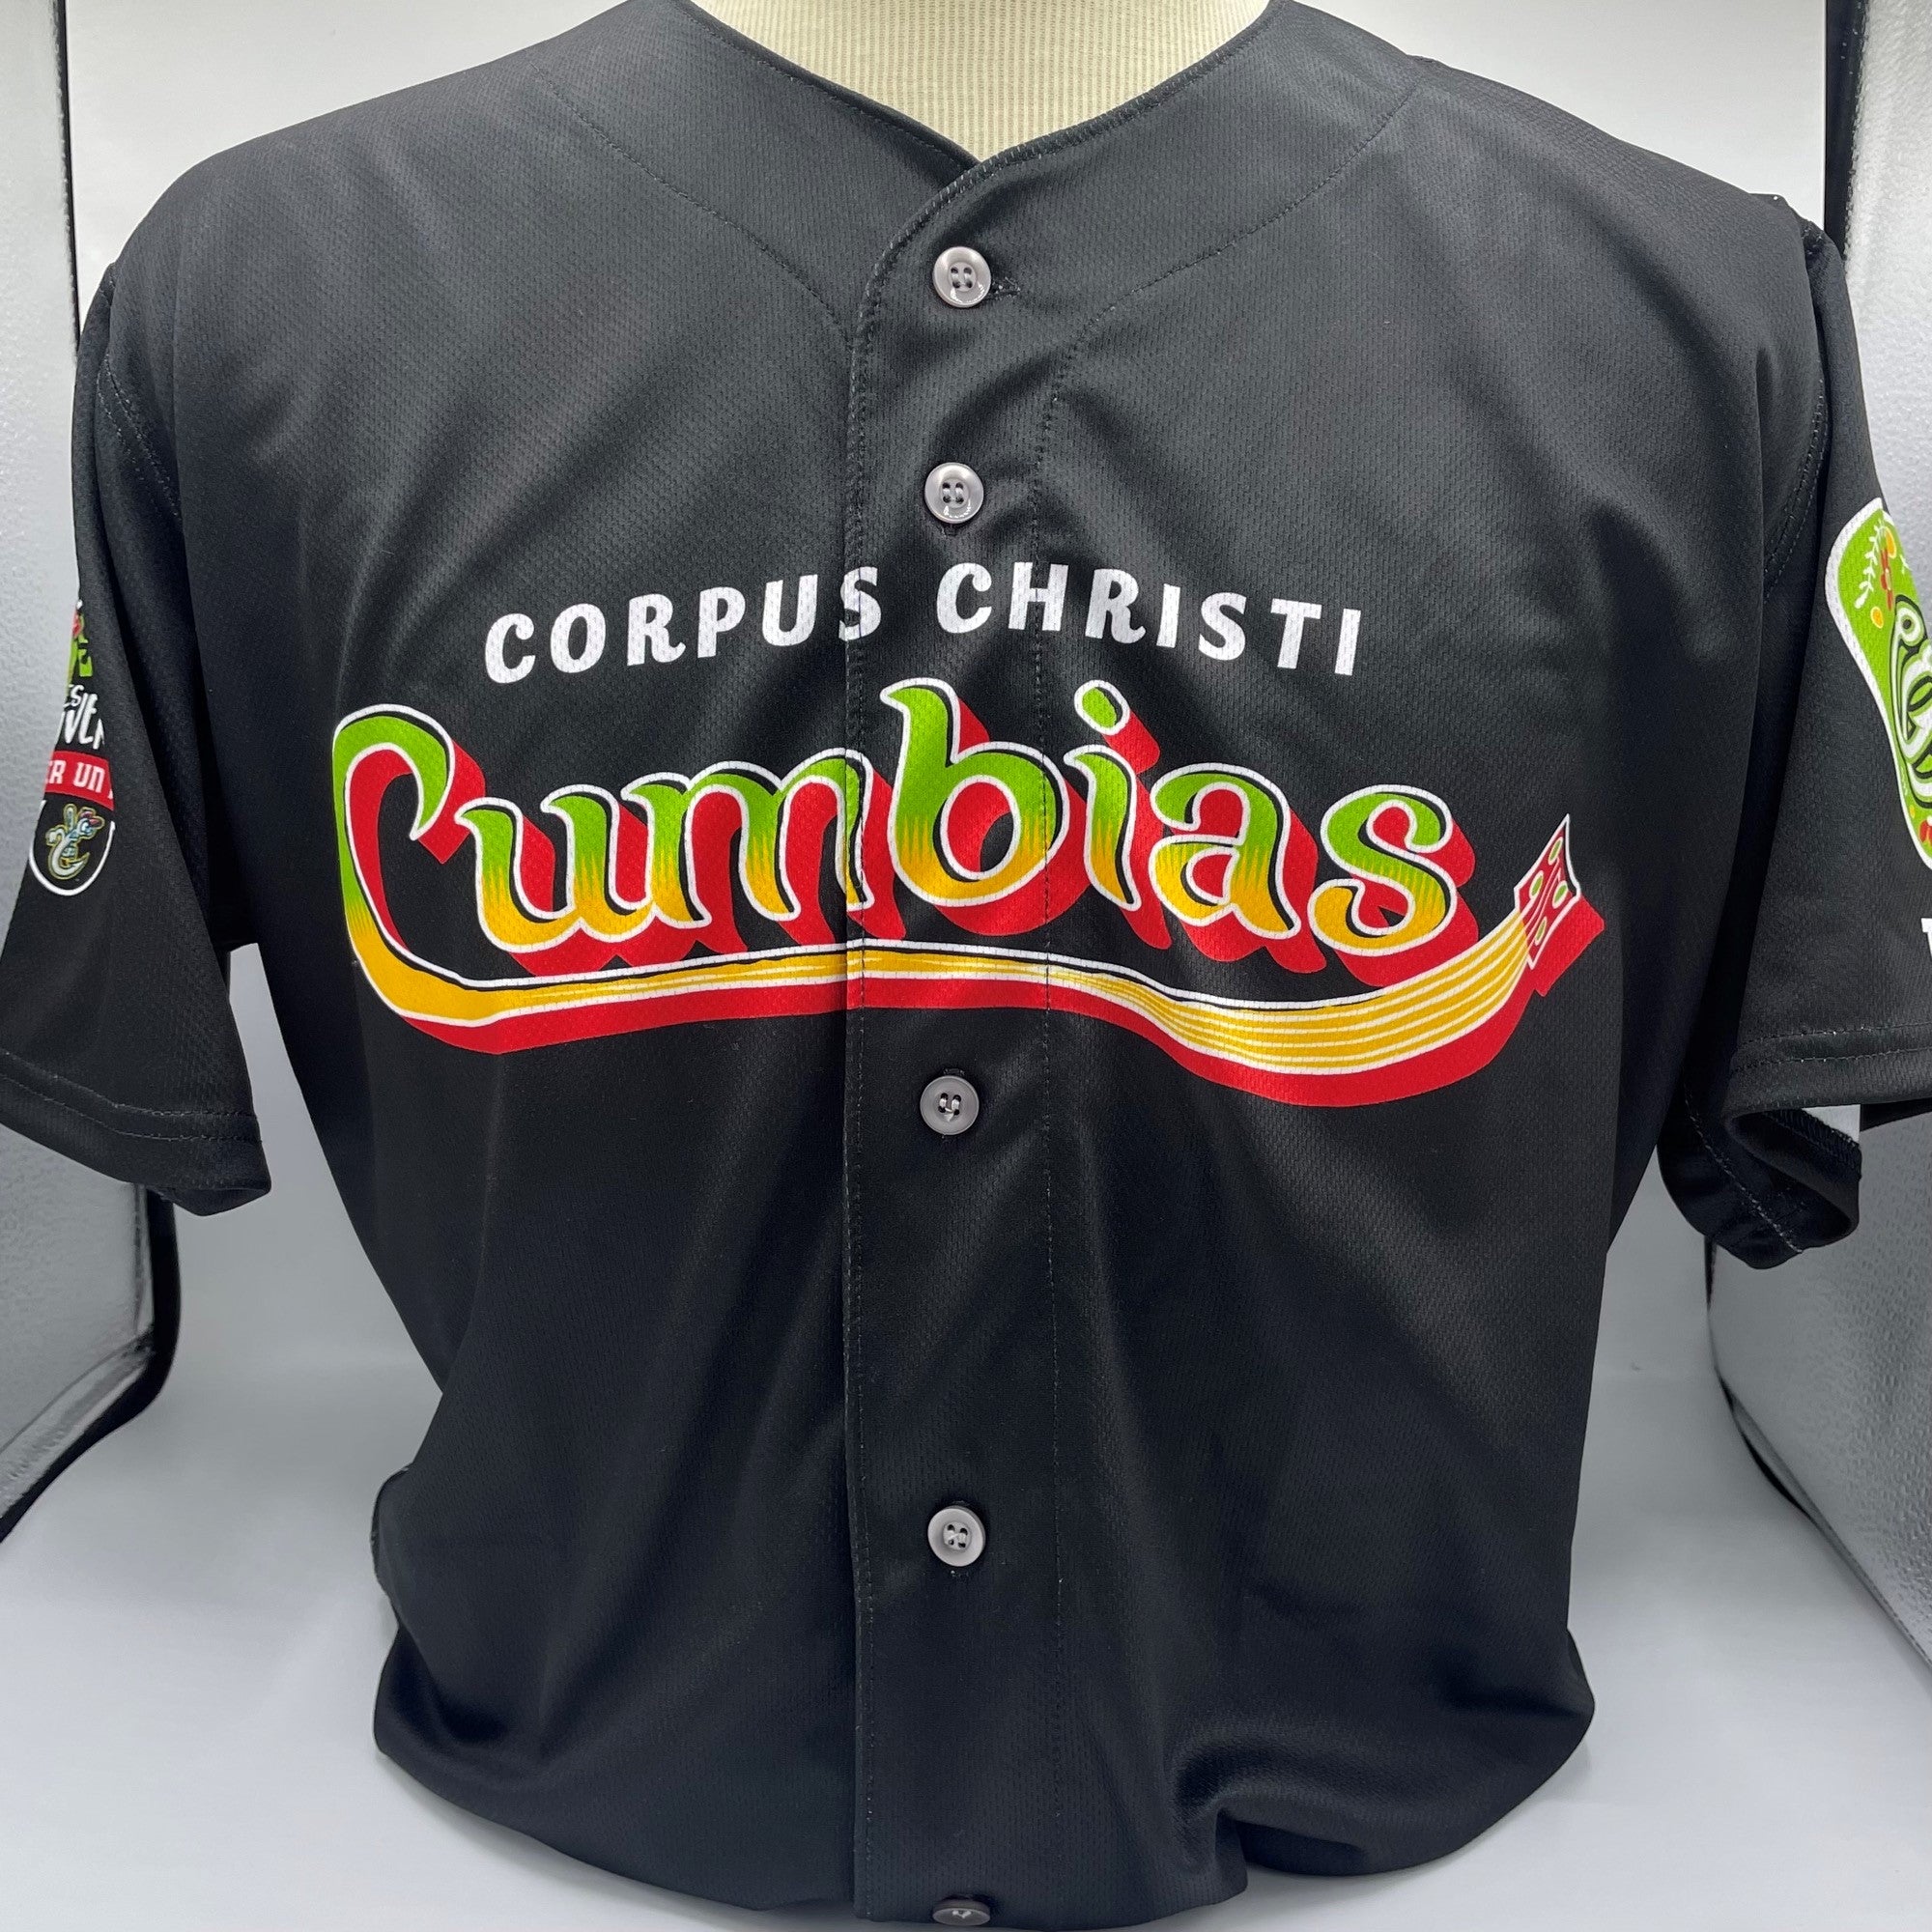 Corpus Christi Hooks - ‪The Hooks Christmas in July uniforms. You can bid  on this weekend's game-used jerseys at the link below. ❄️☃️‬ ‪BID: http:// hooks.milbauctions.com‬